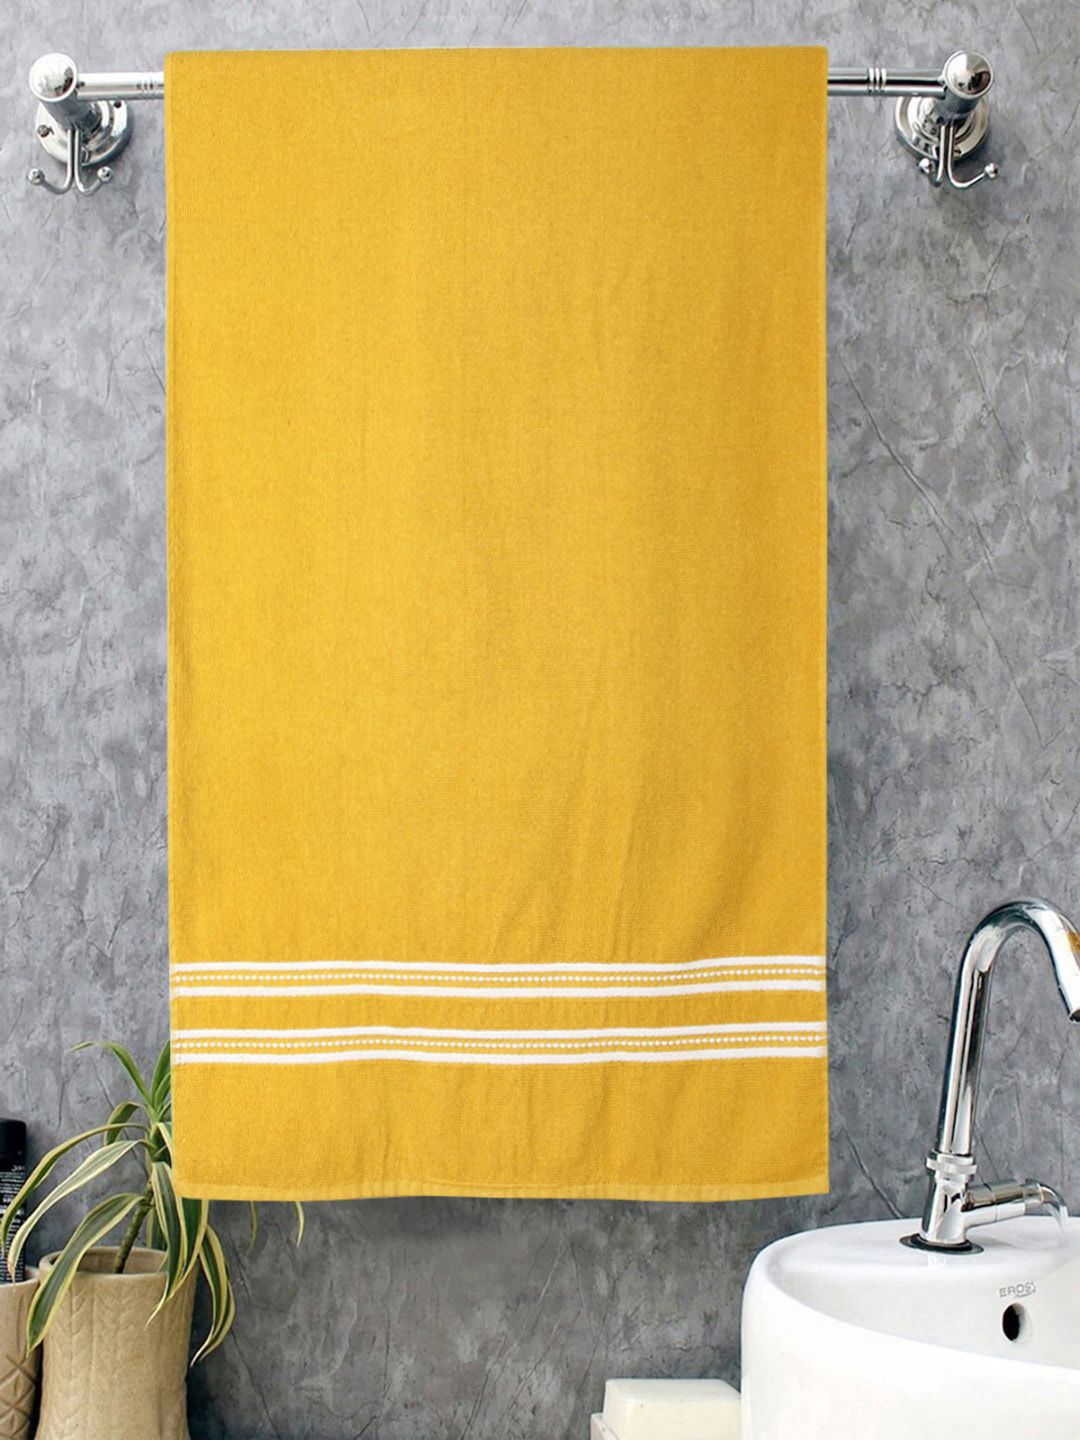 ROMEE Unisex Set Of 2 Yellow & White Striped 500 GSM Bath Towels Price in India